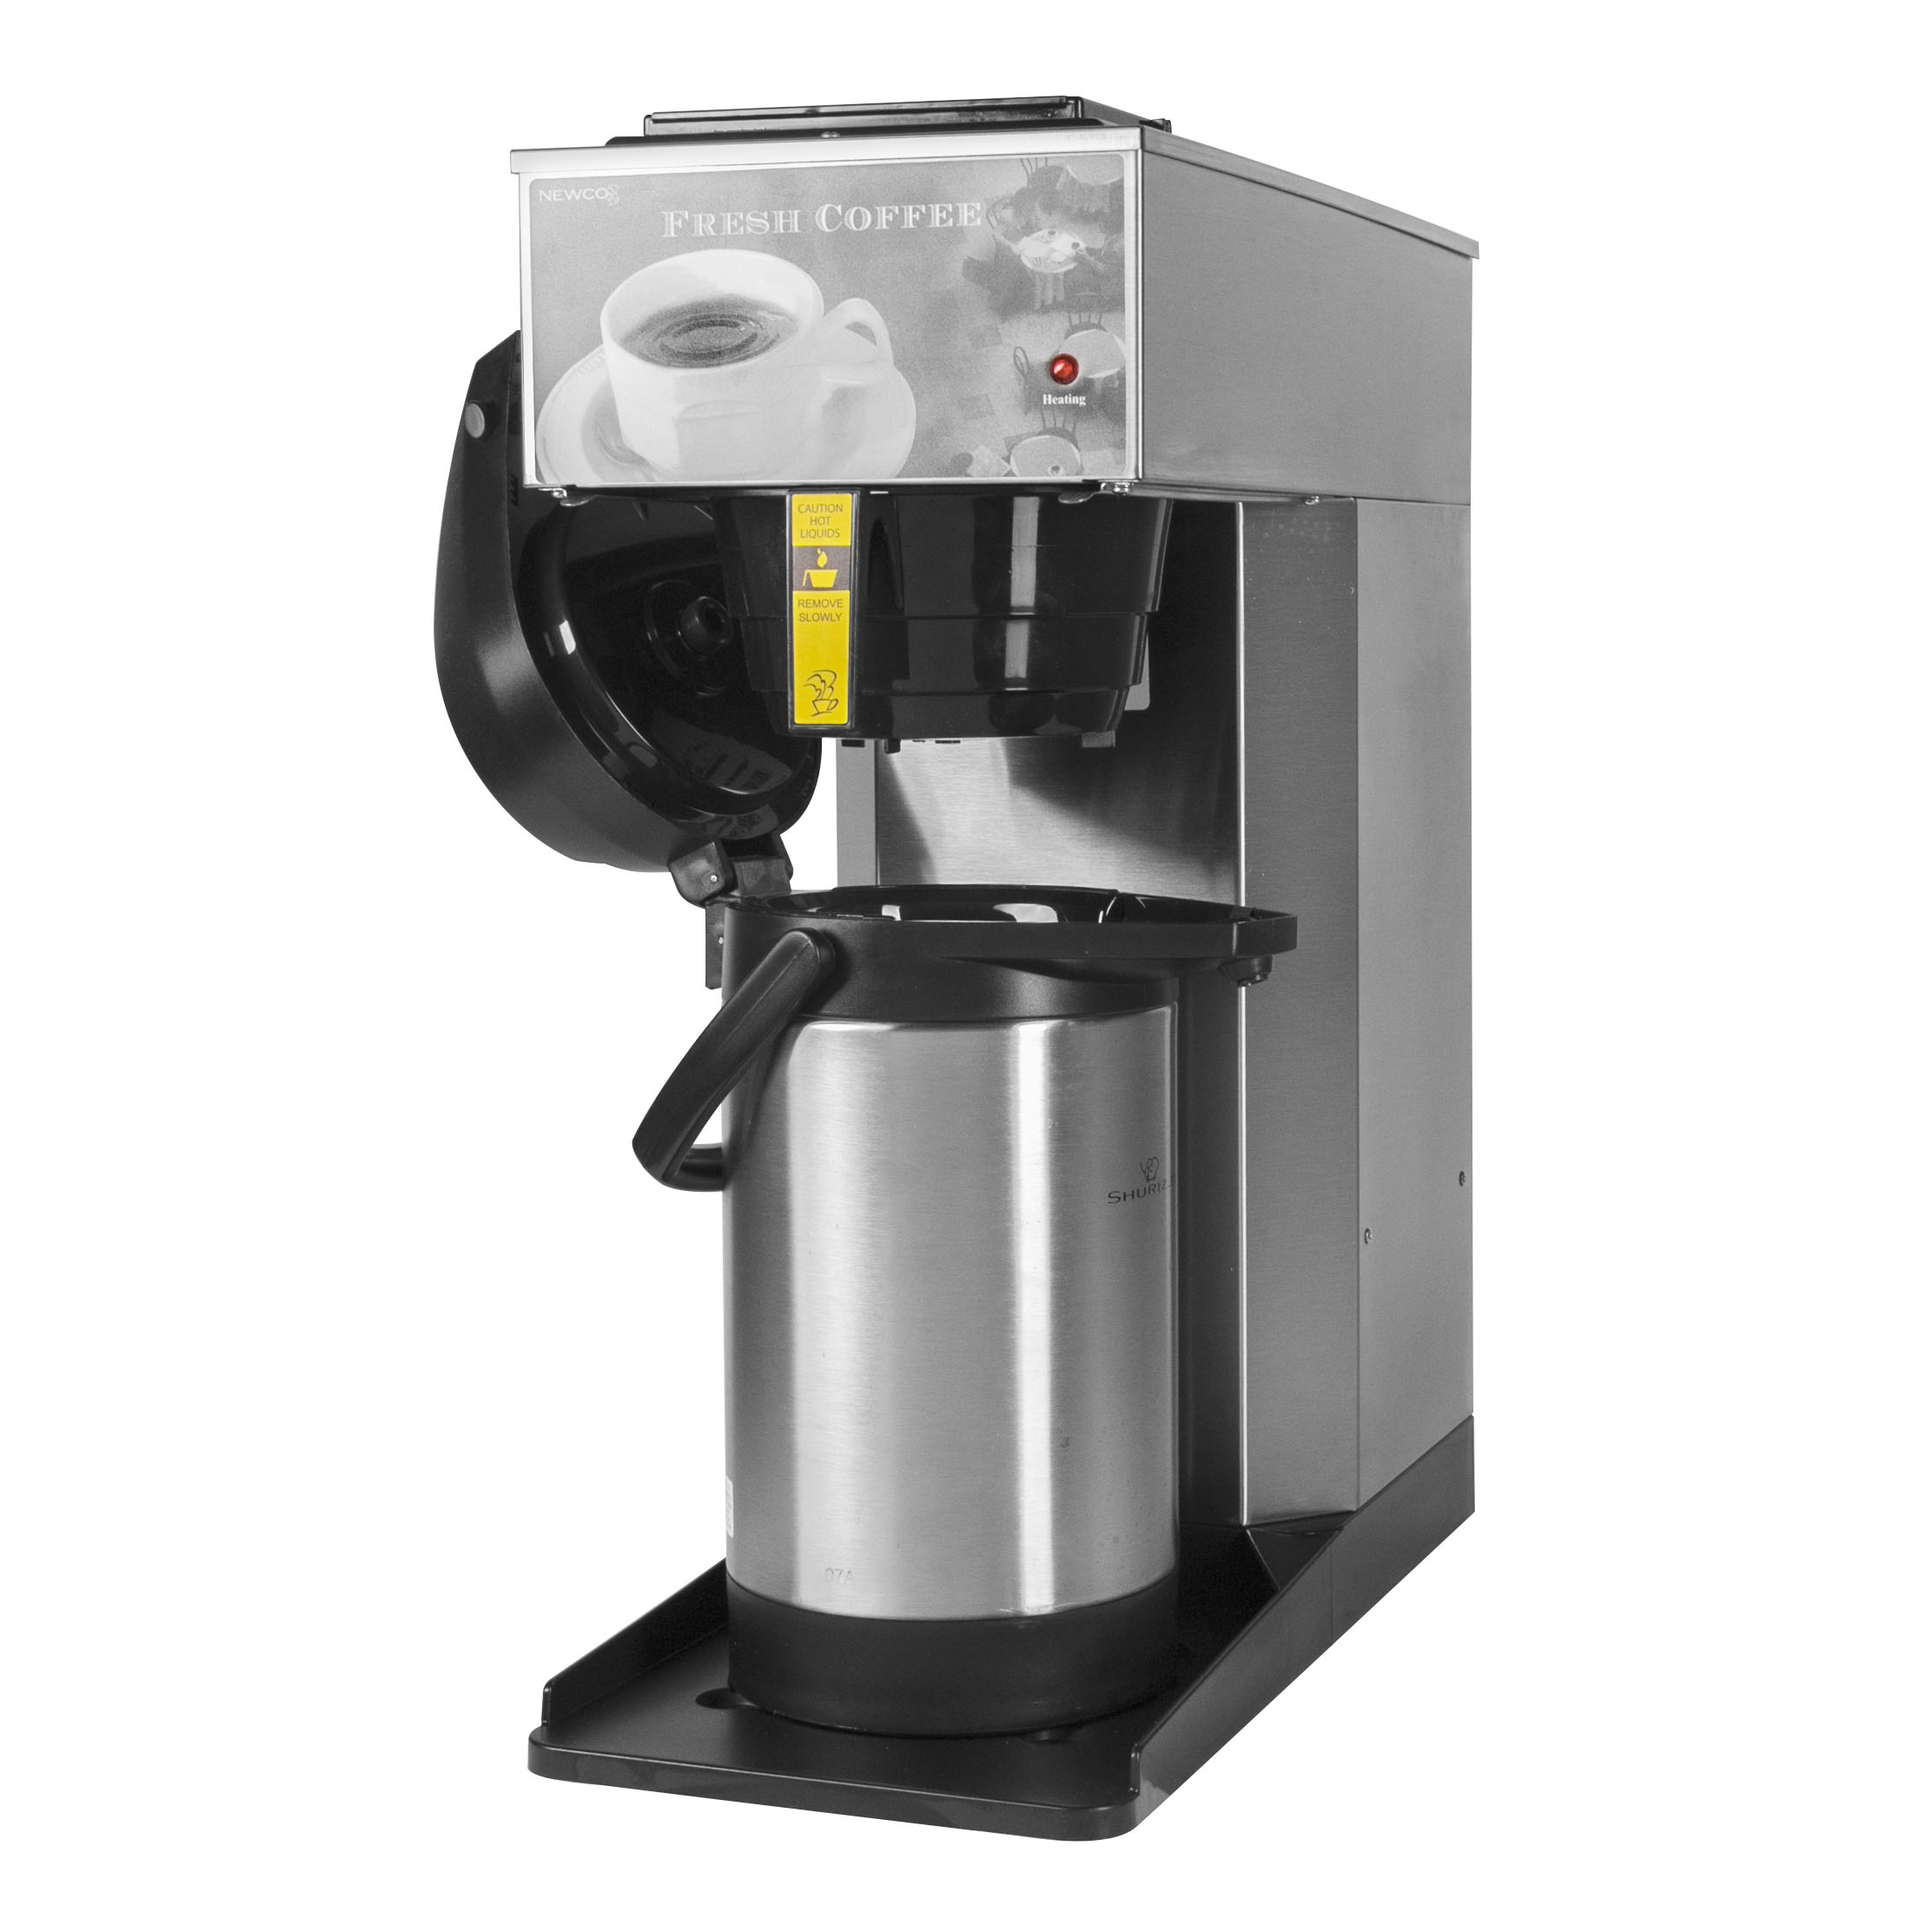 Newco Fresh Cup 4 Brewer  Commercial Office Coffee Machines Denver